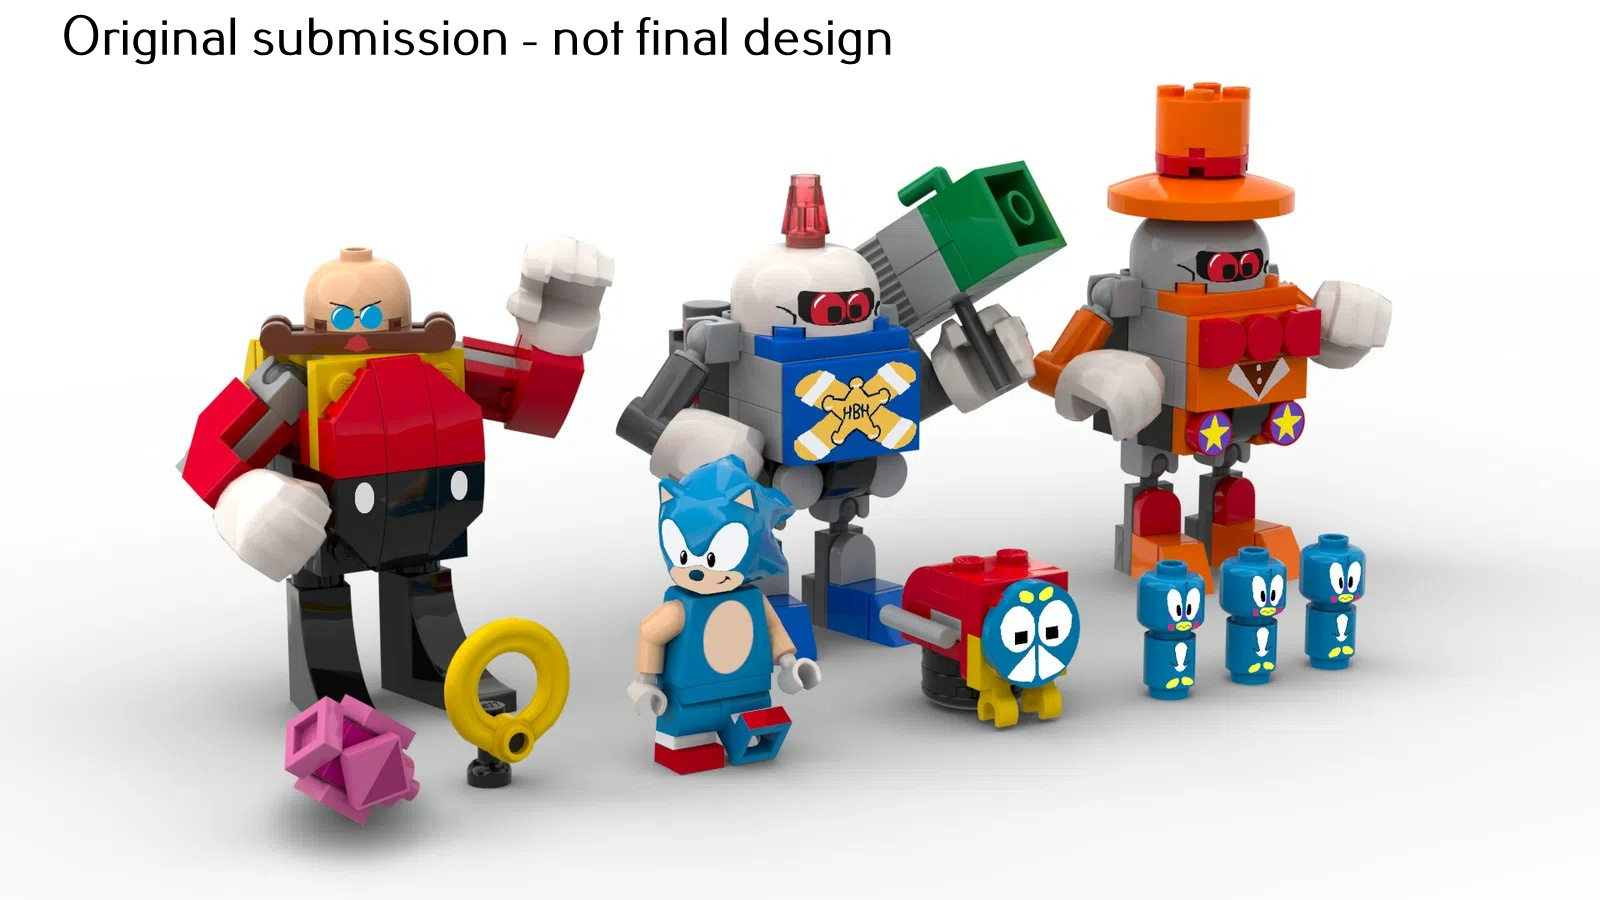 The Analytical Artist on X: For YEARS, I wanted my two favorite video game  franchises, #SonictheHedgehog and #SuperMario to get the #LEGO treatment!  Now we need #LEGOSonictheHedgehog to return and get more